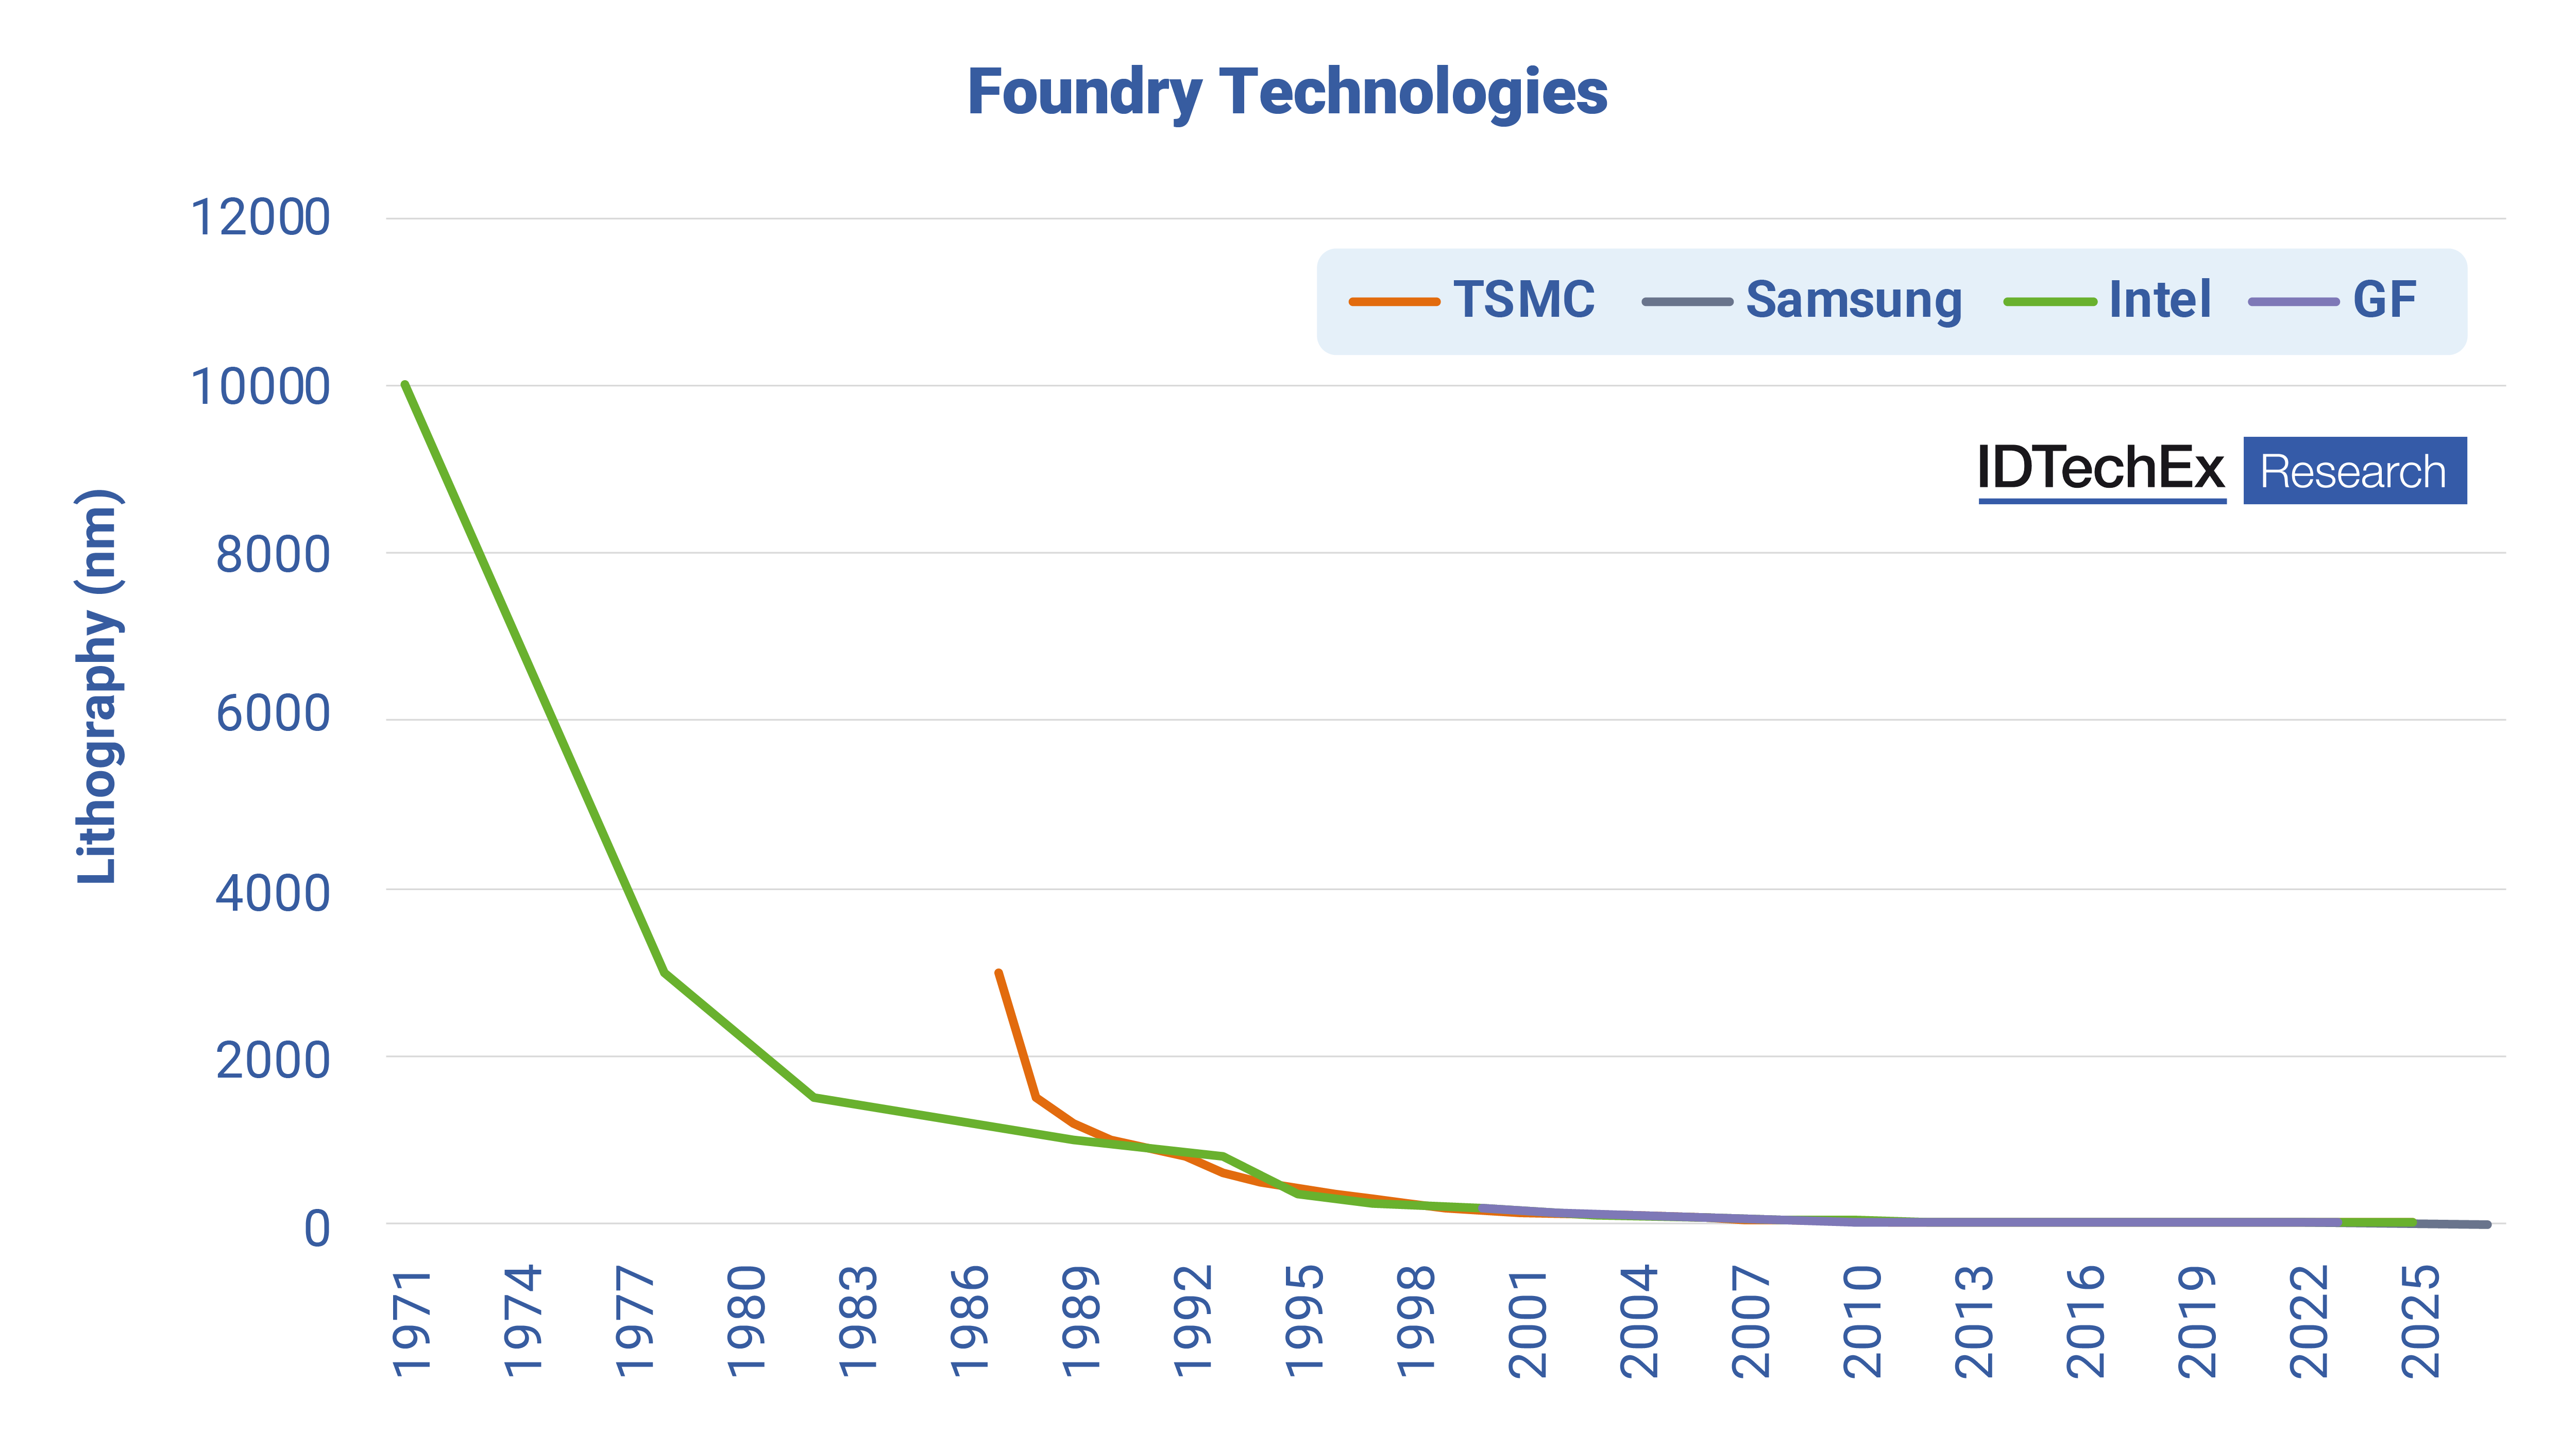 Foundry technologies. Source: IDTechEx